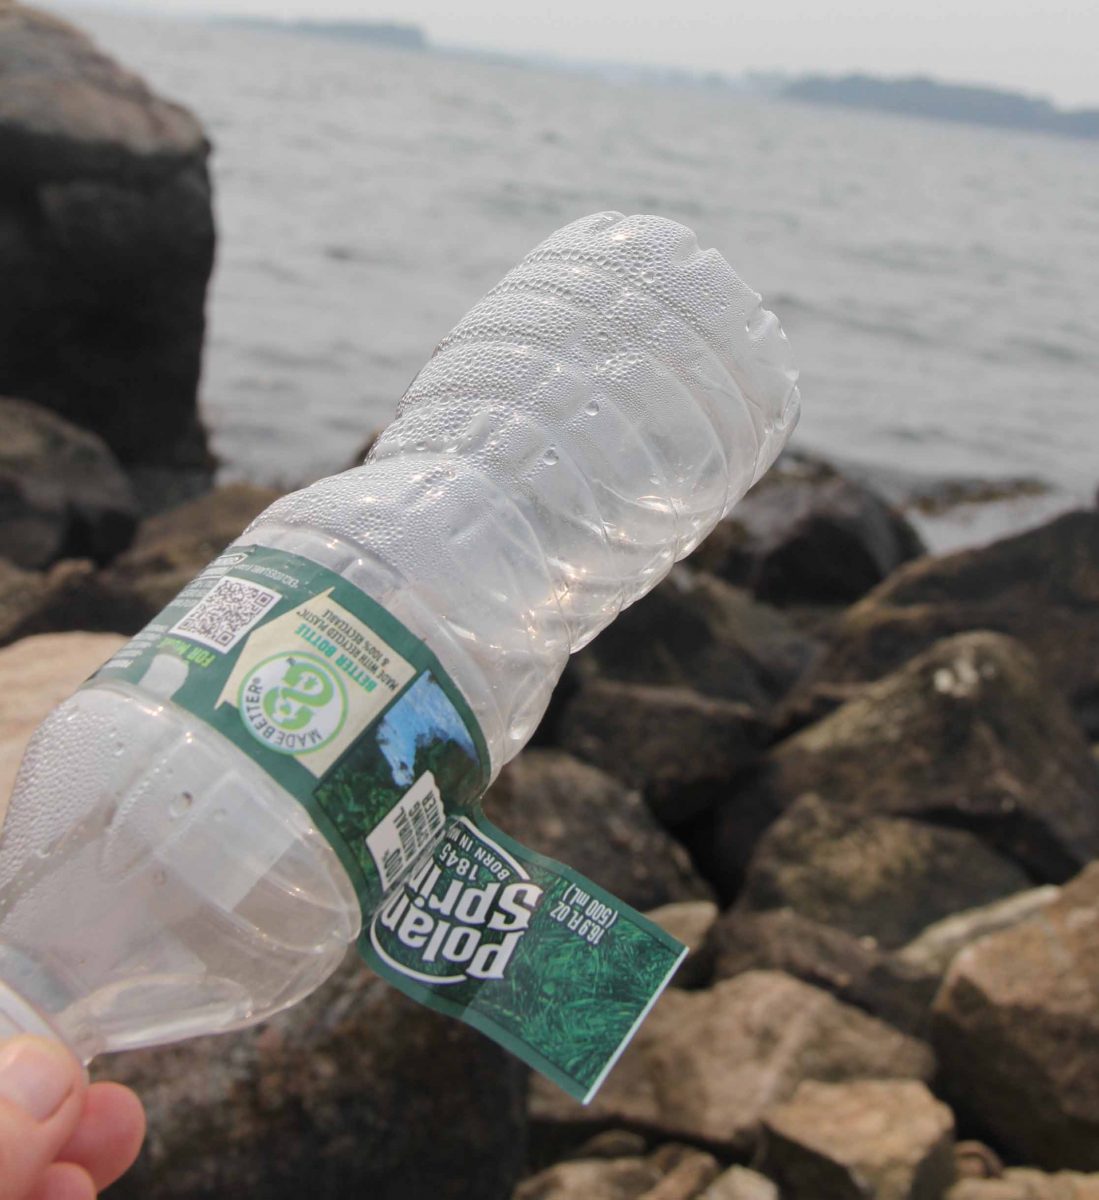 Disposable water bottles are one of the items that would be banned under the new order.